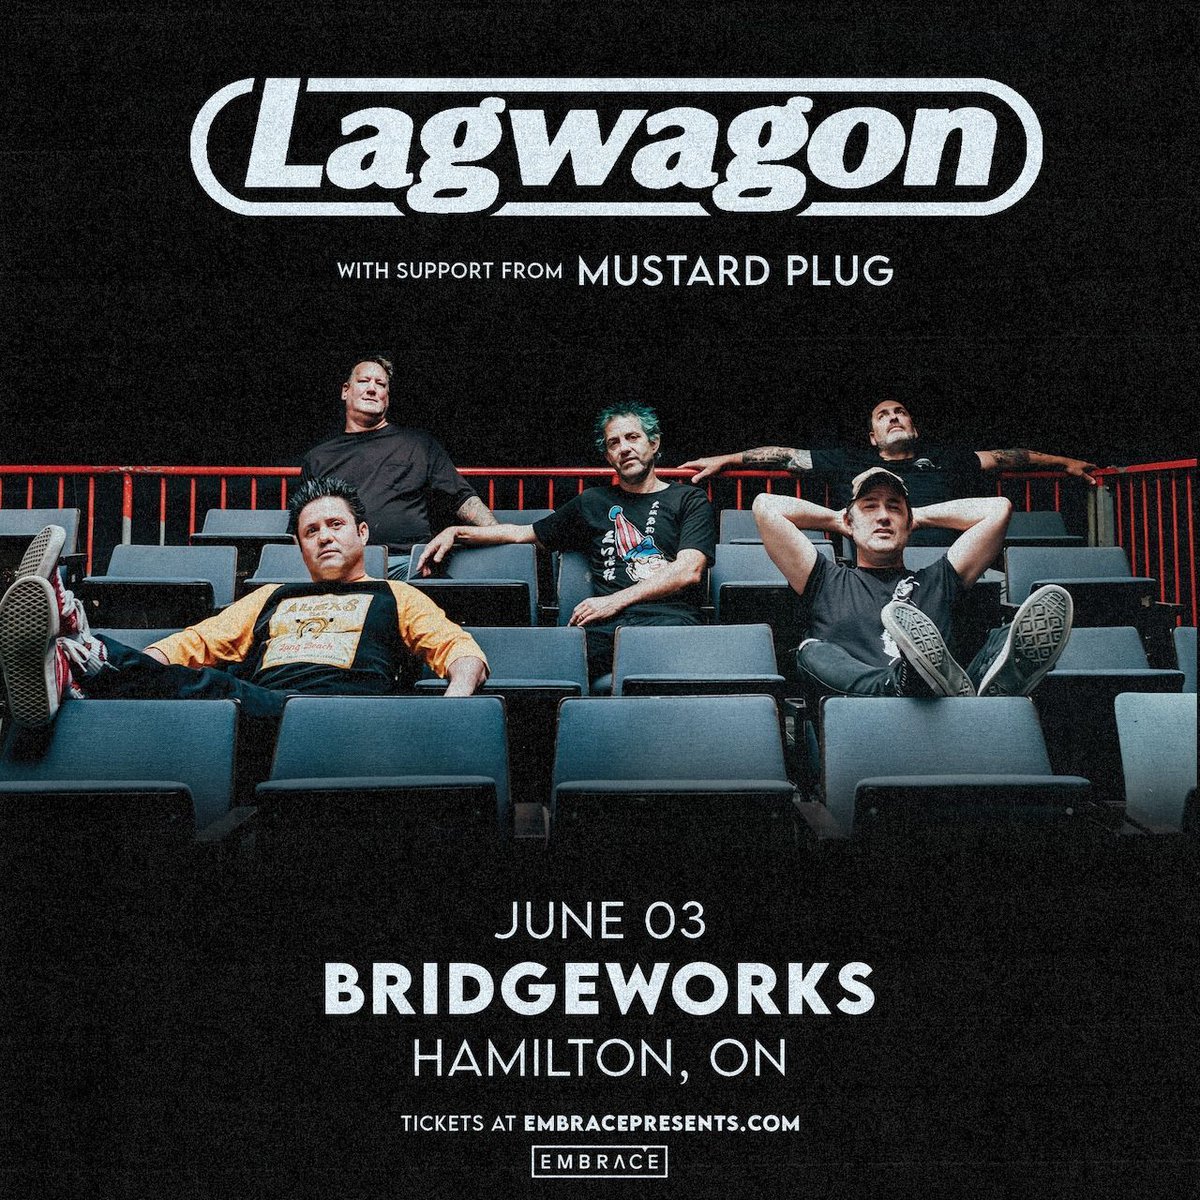 ON SALE NOW: Punk rockers Lagwagon return to Bridgeworks on June 3rd with support from Mustard Plug! Tickets are on sale NOW at bridgeworks.ca 🤘 #hamont